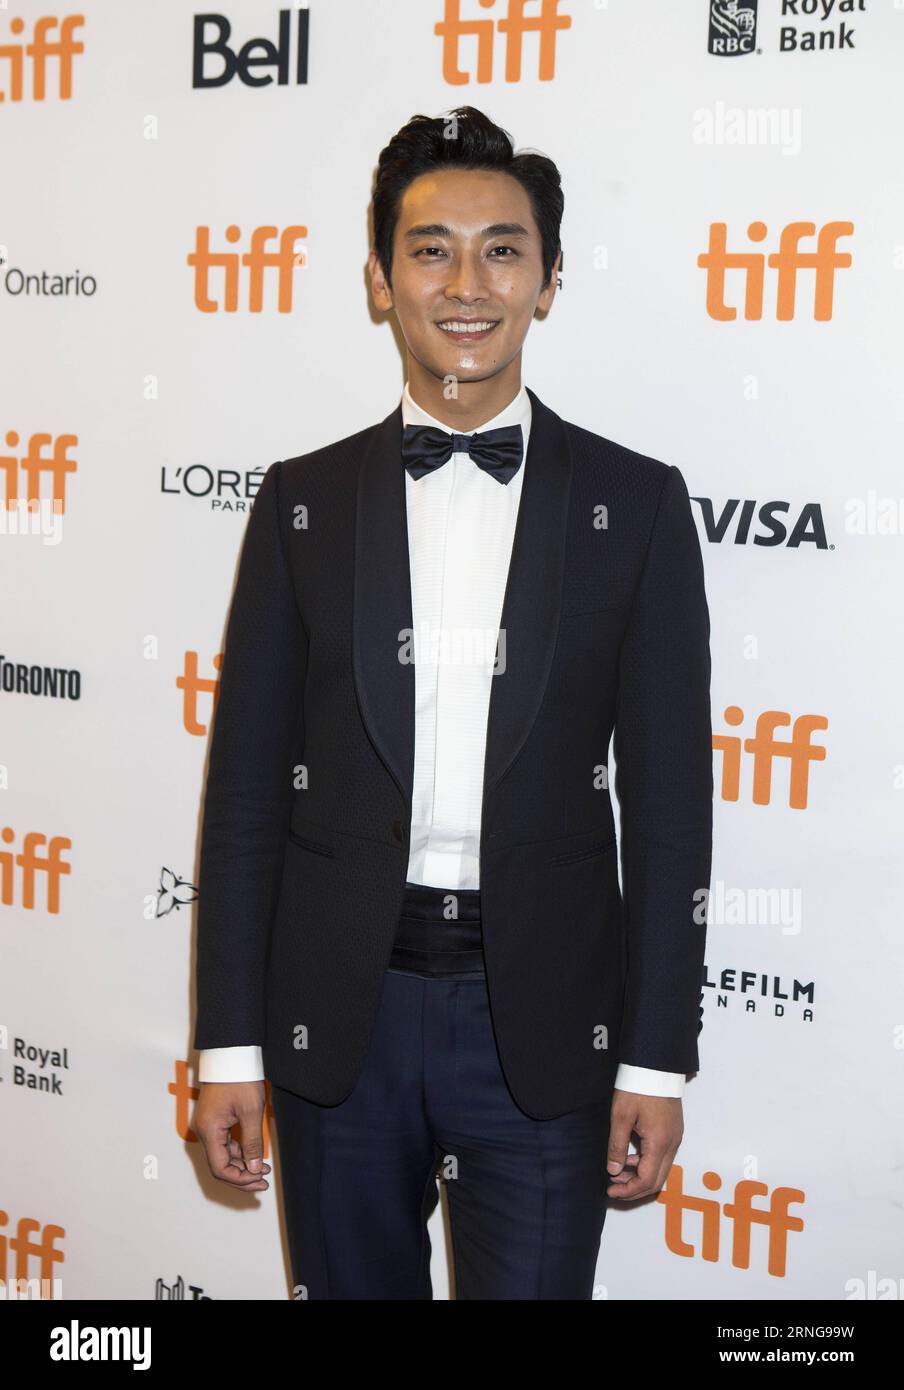 (160914) -- TORONTO, Sept. 13, 2016 -- South Korean actor Ju Ji-hoon attends the world premiere of the film Asura:The City of Madness at the Elgin Theater during the 41st Toronto International Film Festival in Toronto, Canada, Sept. 13, 2016. ) (lrz) CANADA-TORONTO-FILM FESTIVAL- ASURA ZouxZheng PUBLICATIONxNOTxINxCHN   160914 Toronto Sept 13 2016 South Korean Actor JU ji Hoon Attends The World Premiere of The Film Asura The City of Madness AT The Elgin Theatre during The 41st Toronto International Film Festival in Toronto Canada Sept 13 2016 lrz Canada Toronto Film Festival Asura ZouxZheng PU Stock Photo